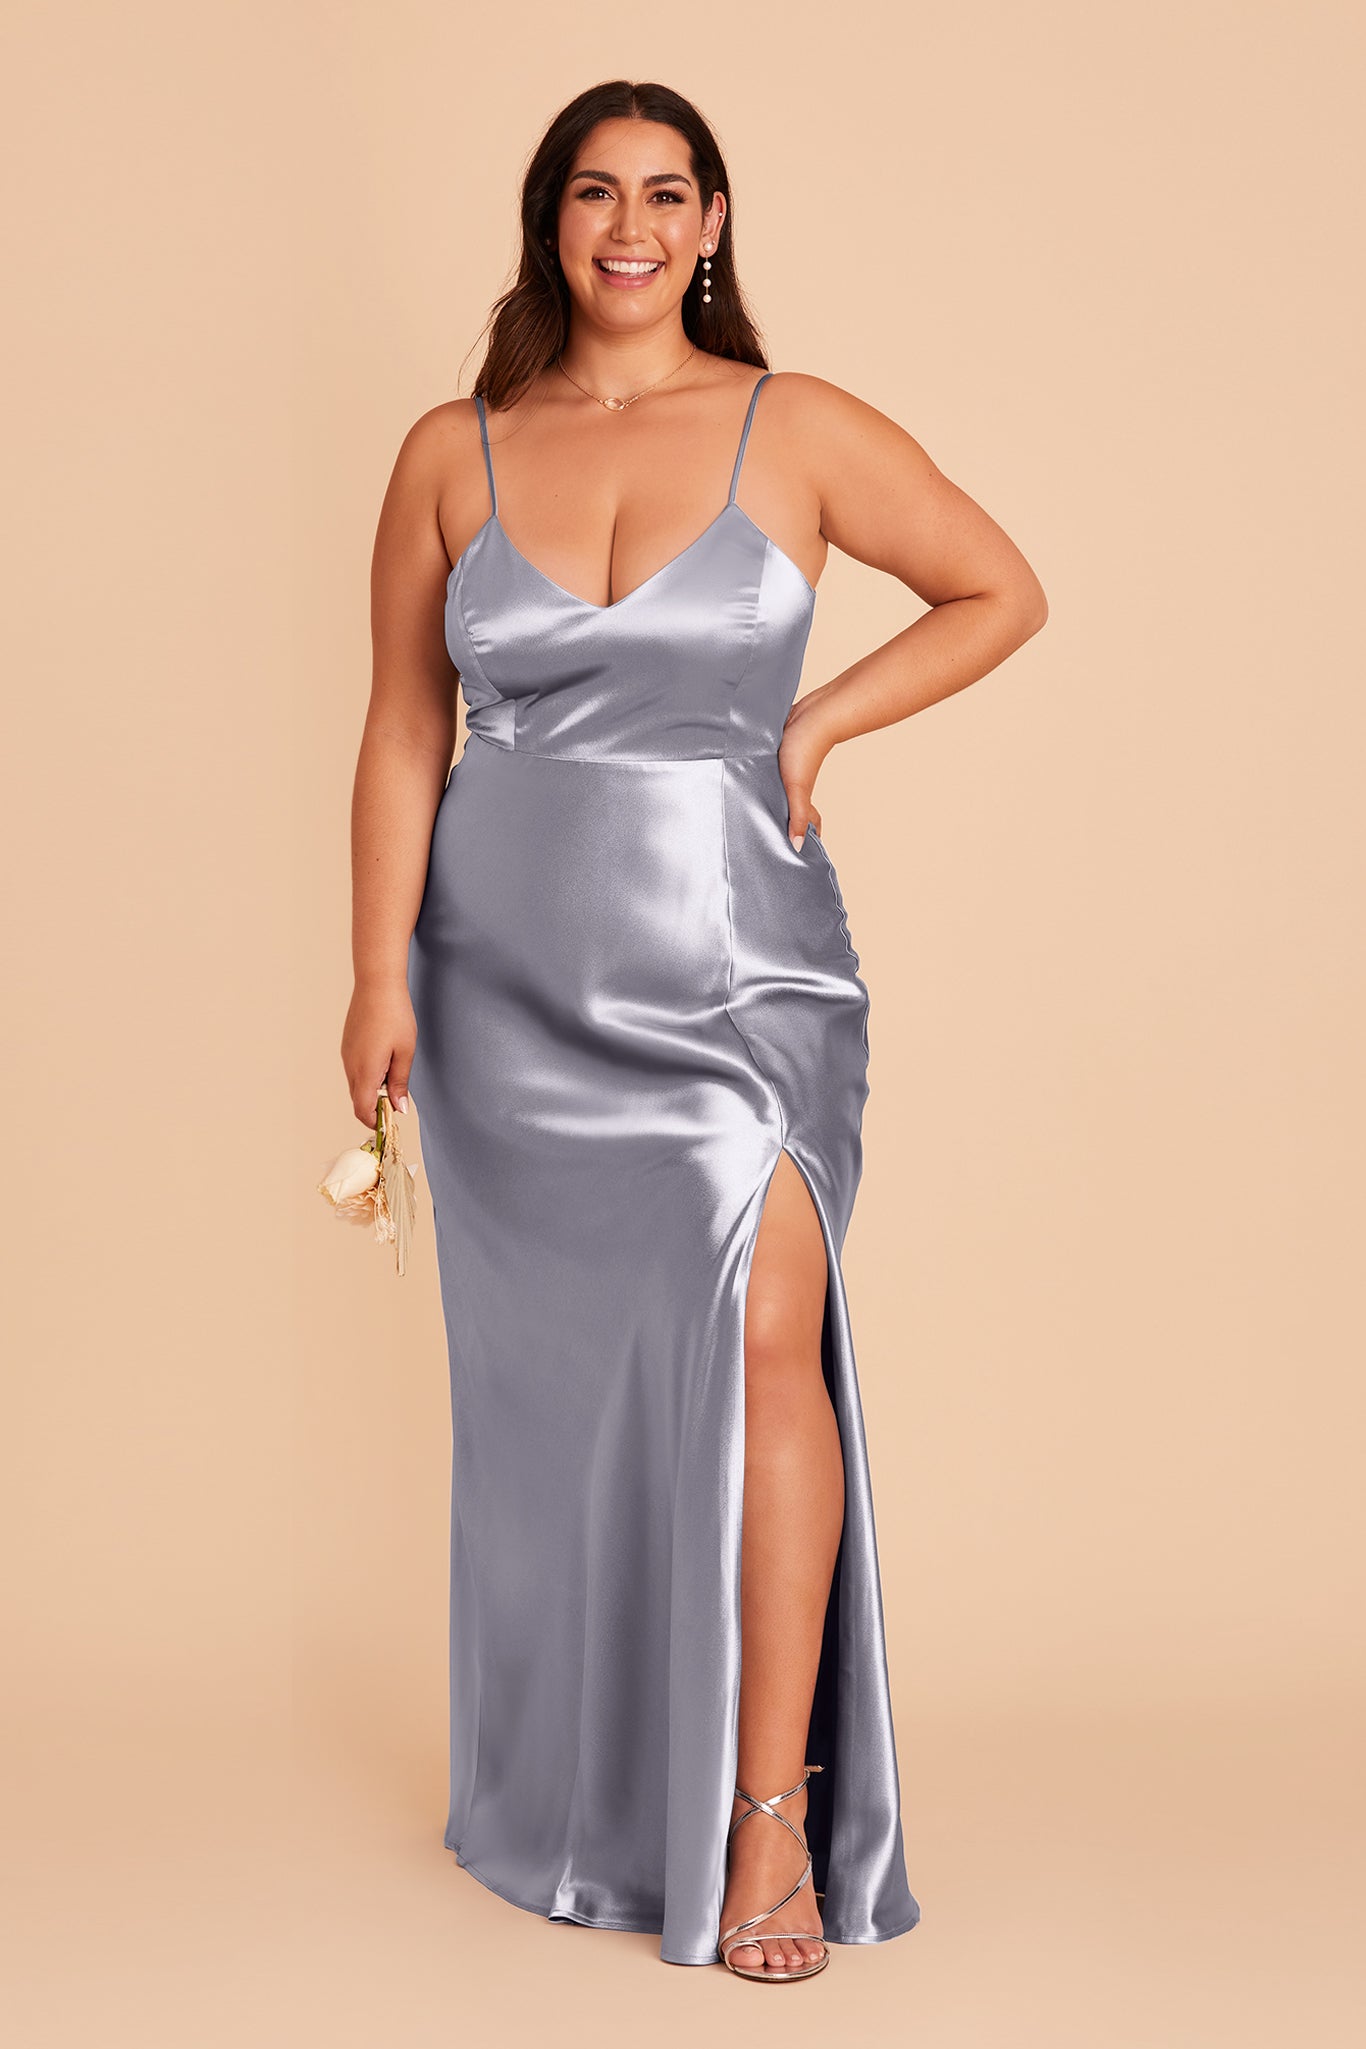 Jay plus size bridesmaid dress with slit in dusty blue satin by Birdy Grey, front view